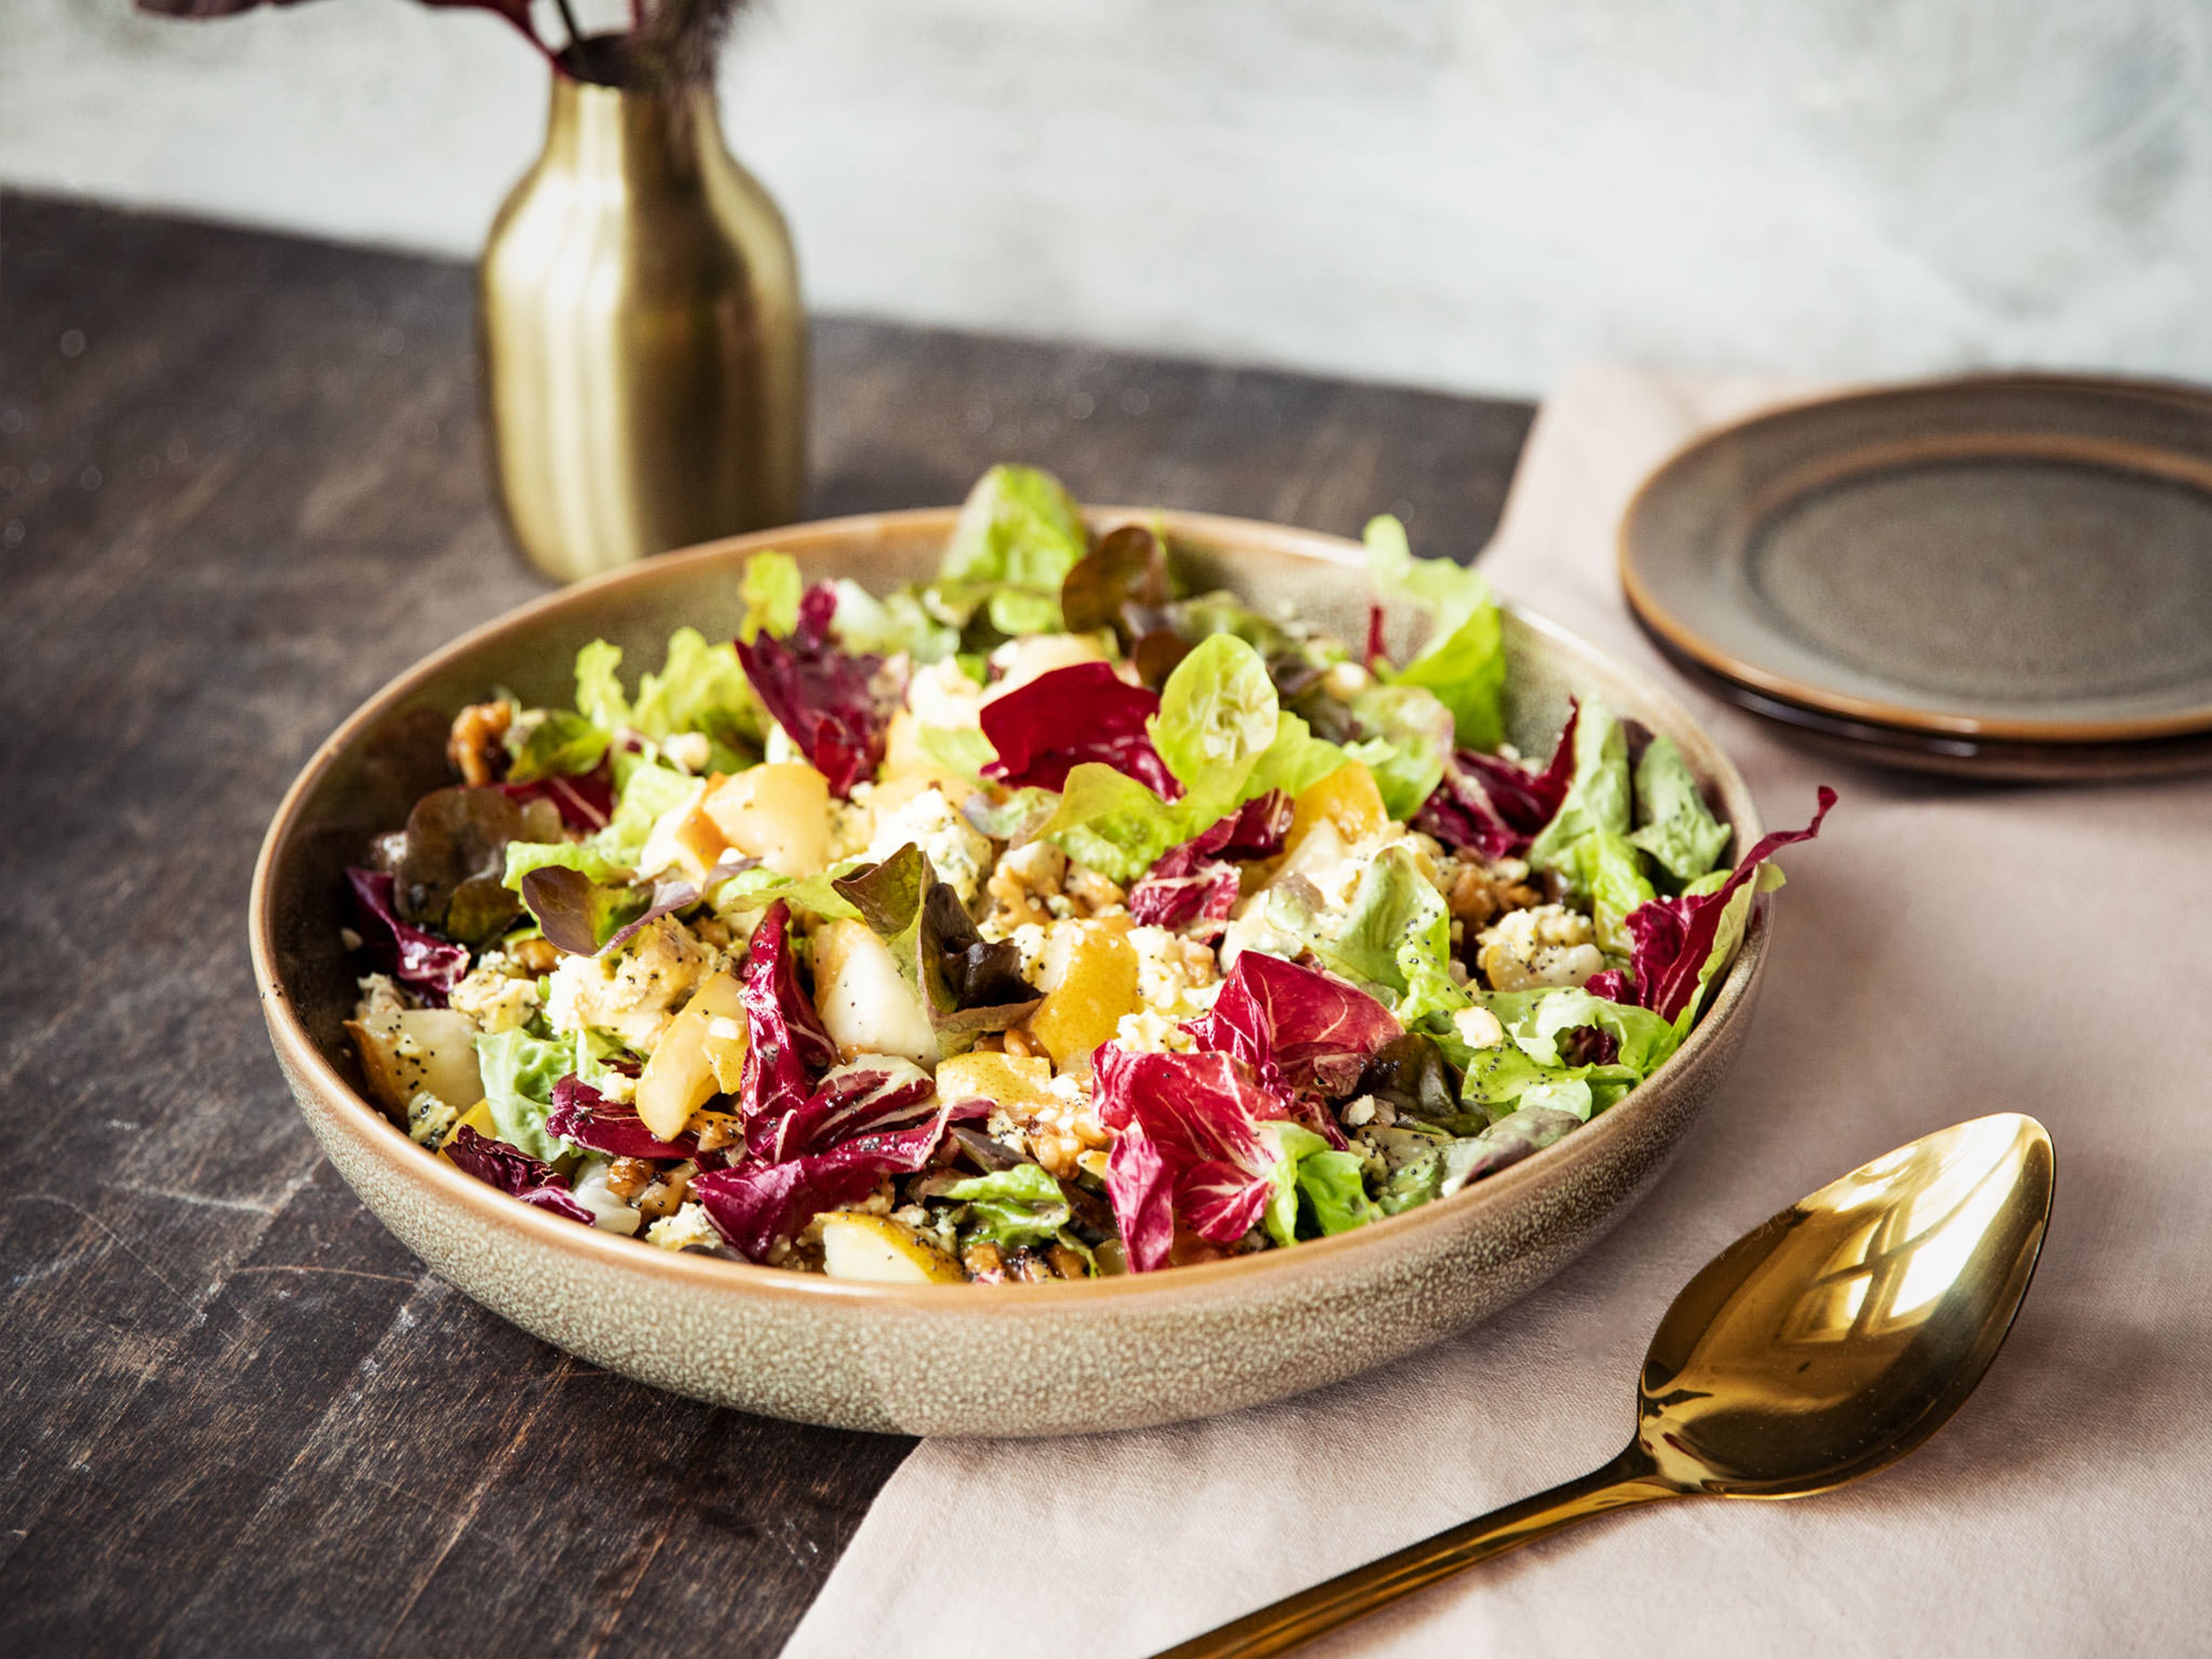 Caramelized pear, radicchio, and blue cheese salad